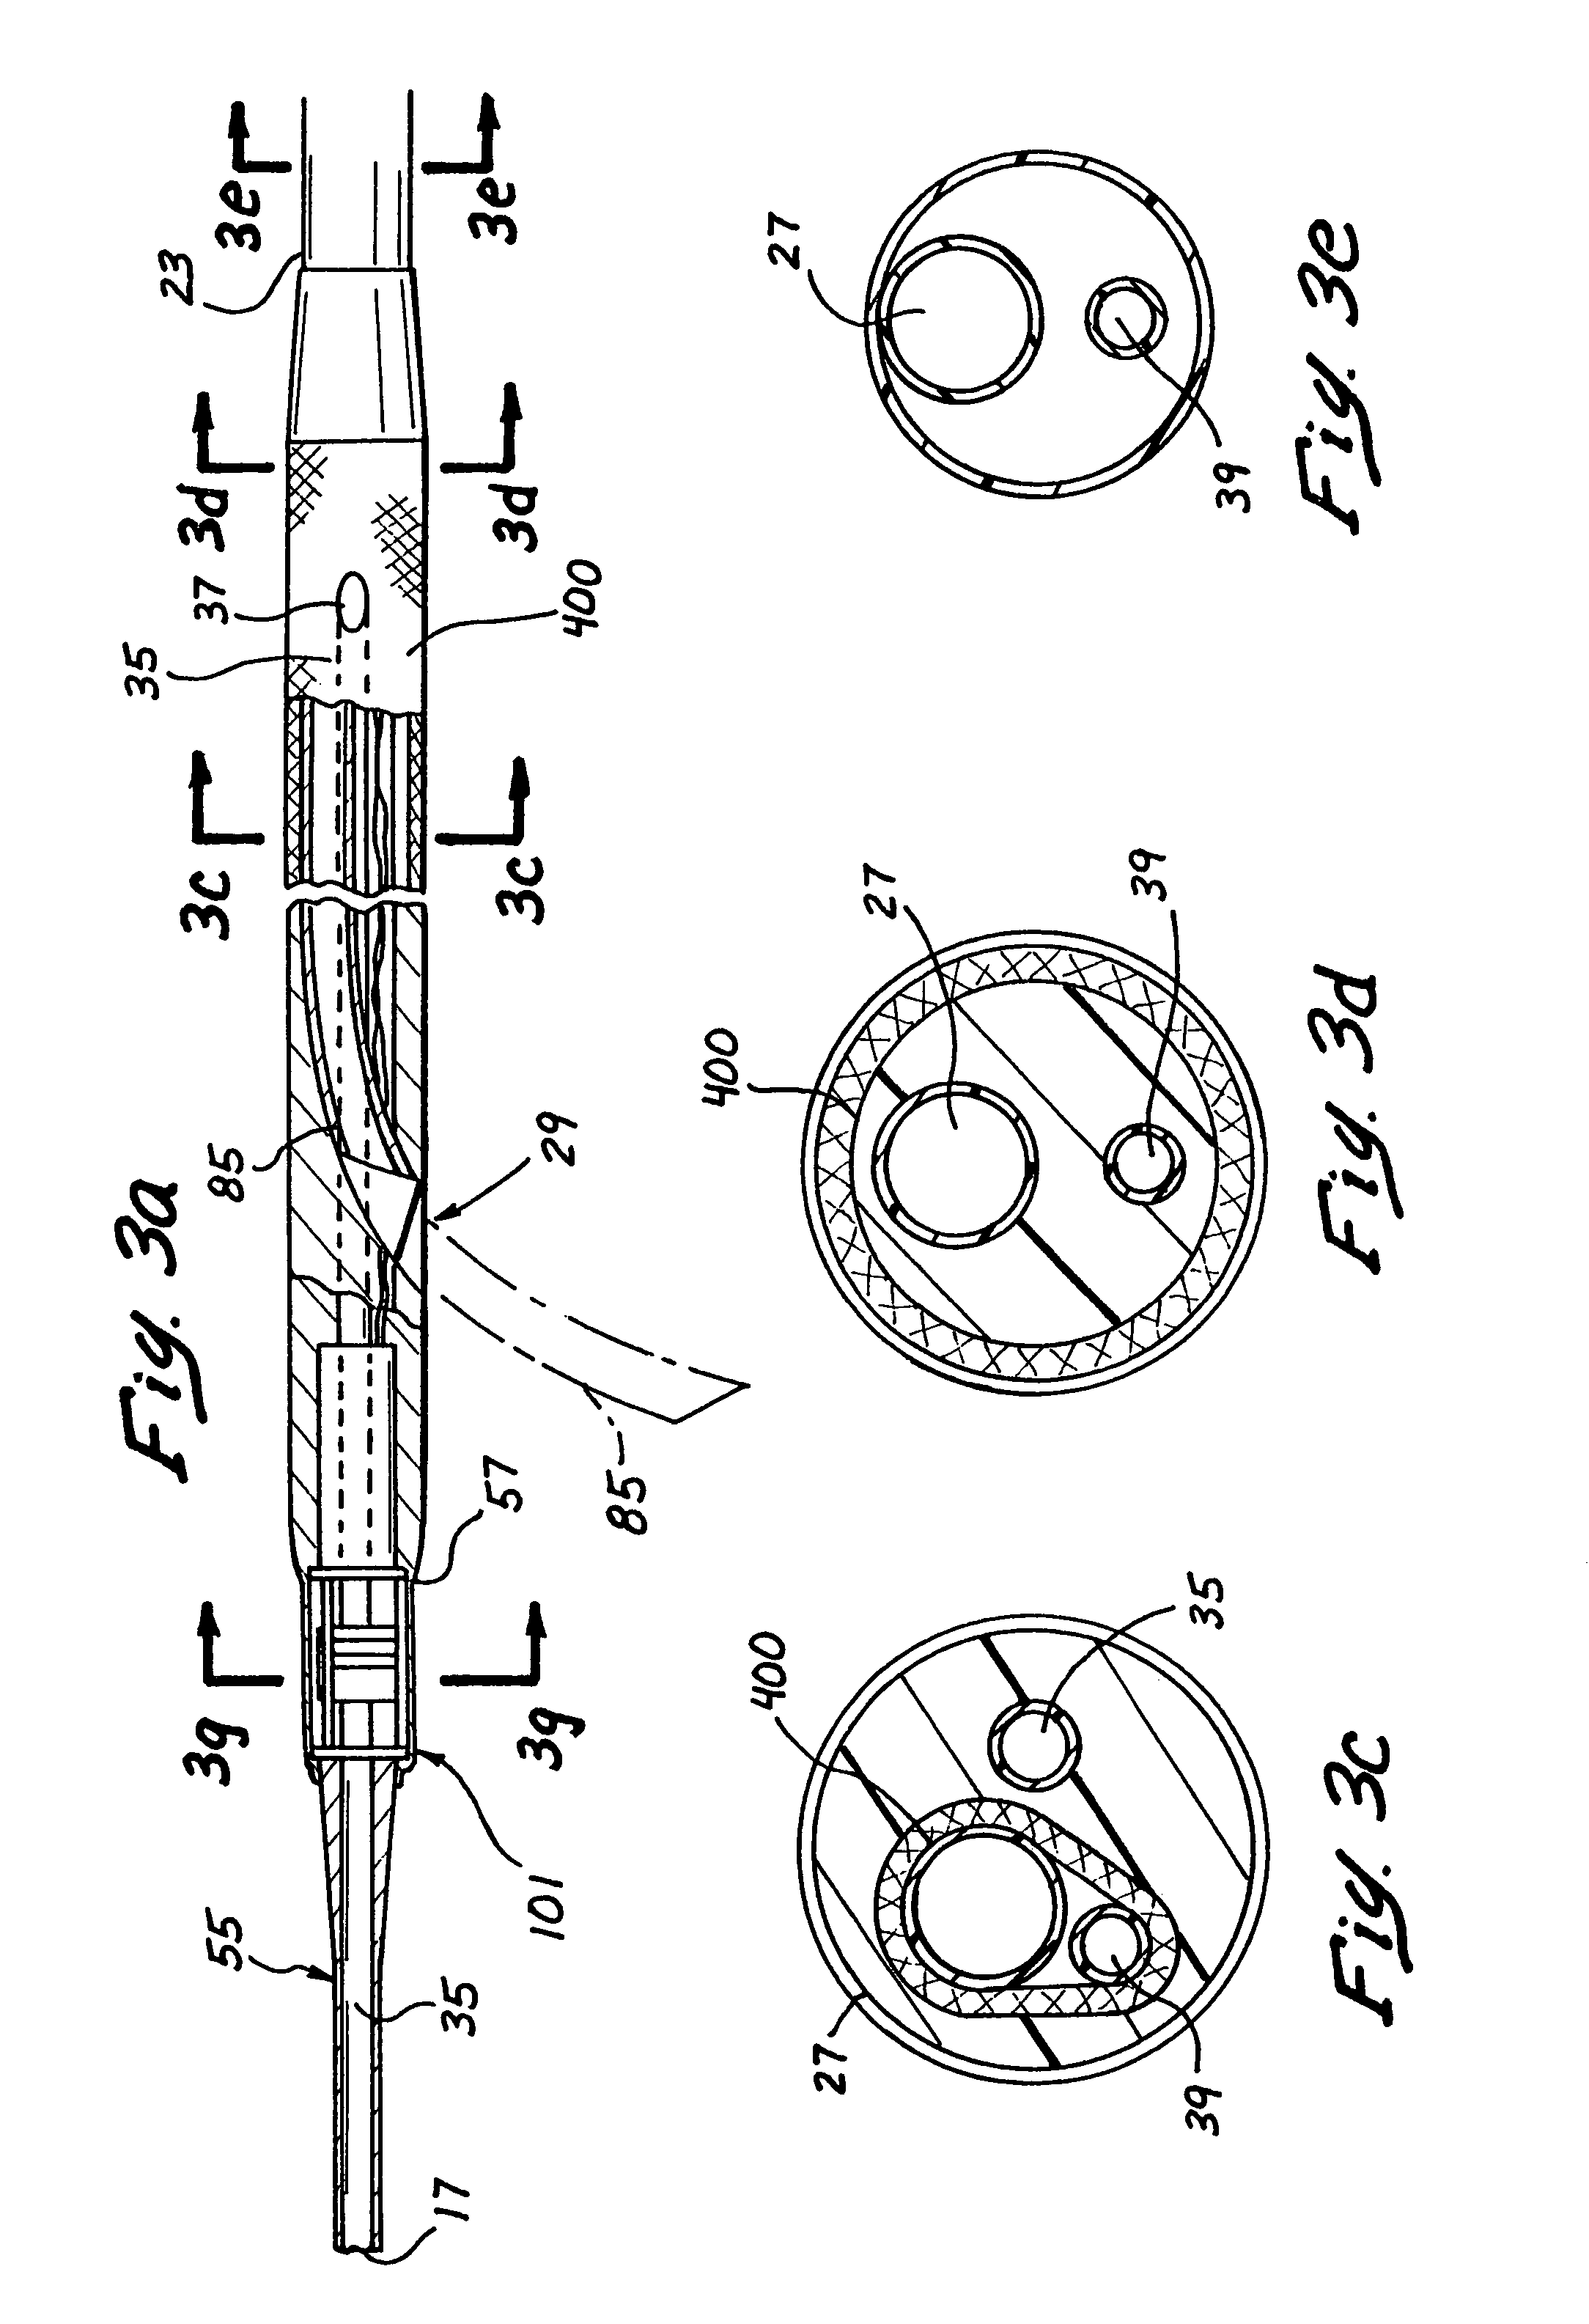 Tissue penetrating catheters having integral imaging transducers and their methods of use